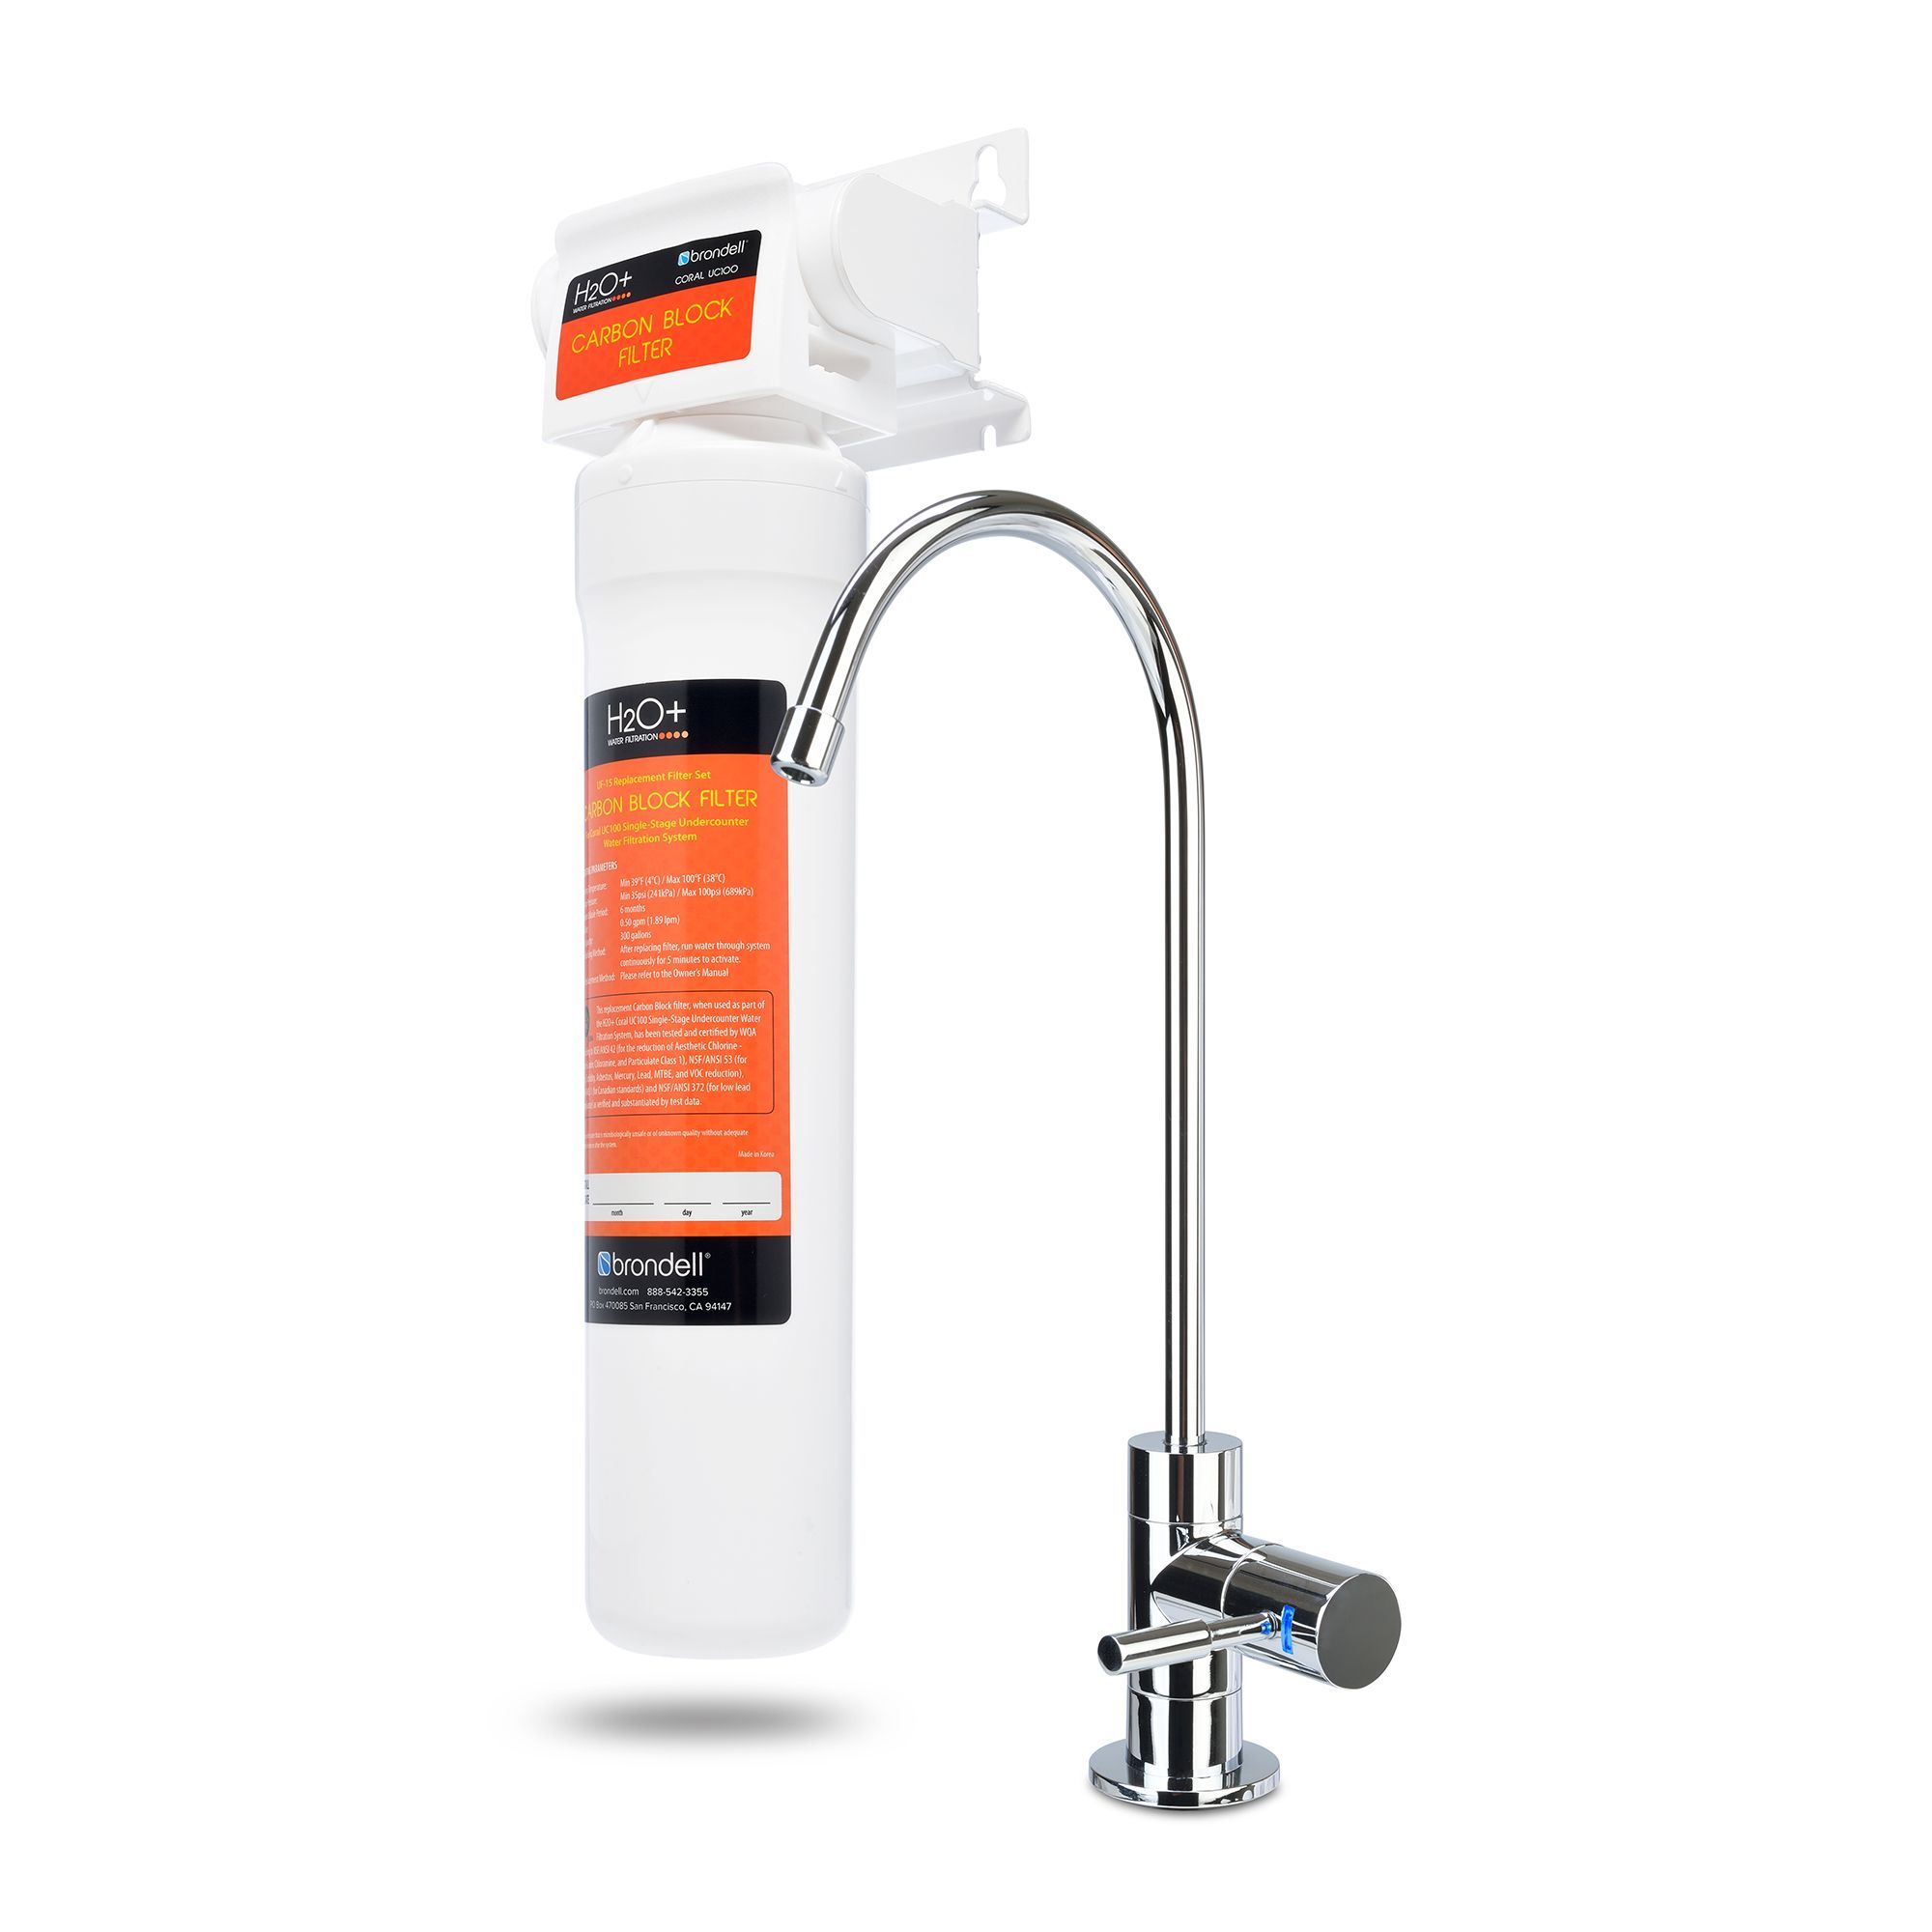 Undercounter Water Filtration System